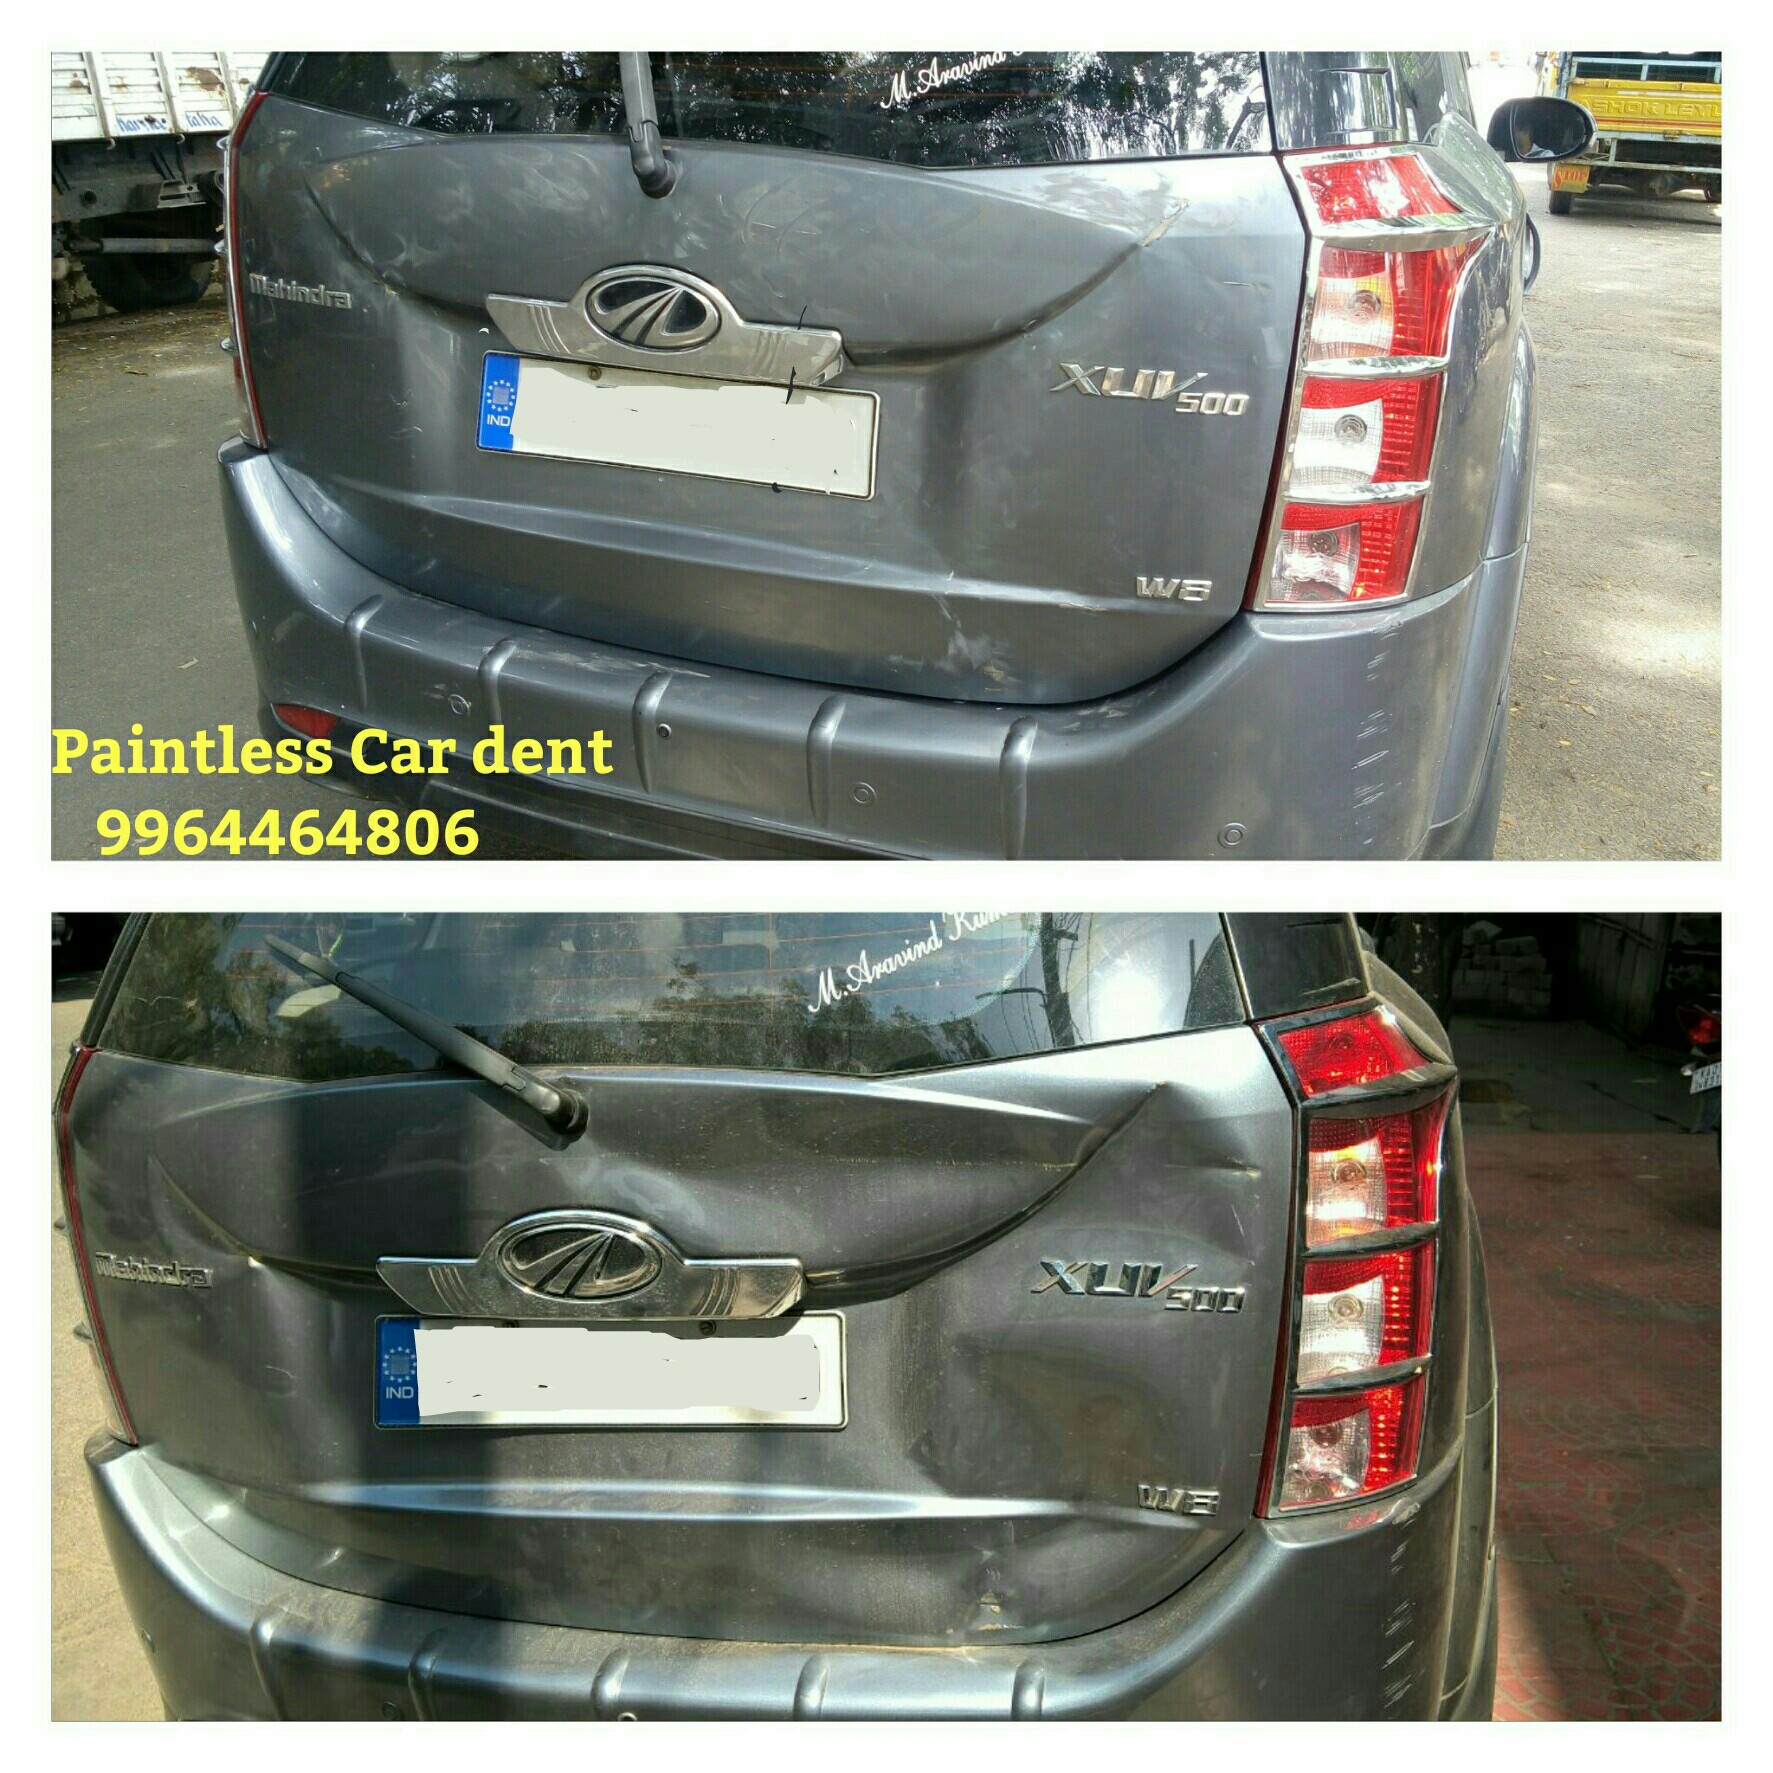 Car Dent Paintless in Anjananagar,Bangalore - Best Tinkering Services in  Bangalore - Justdial